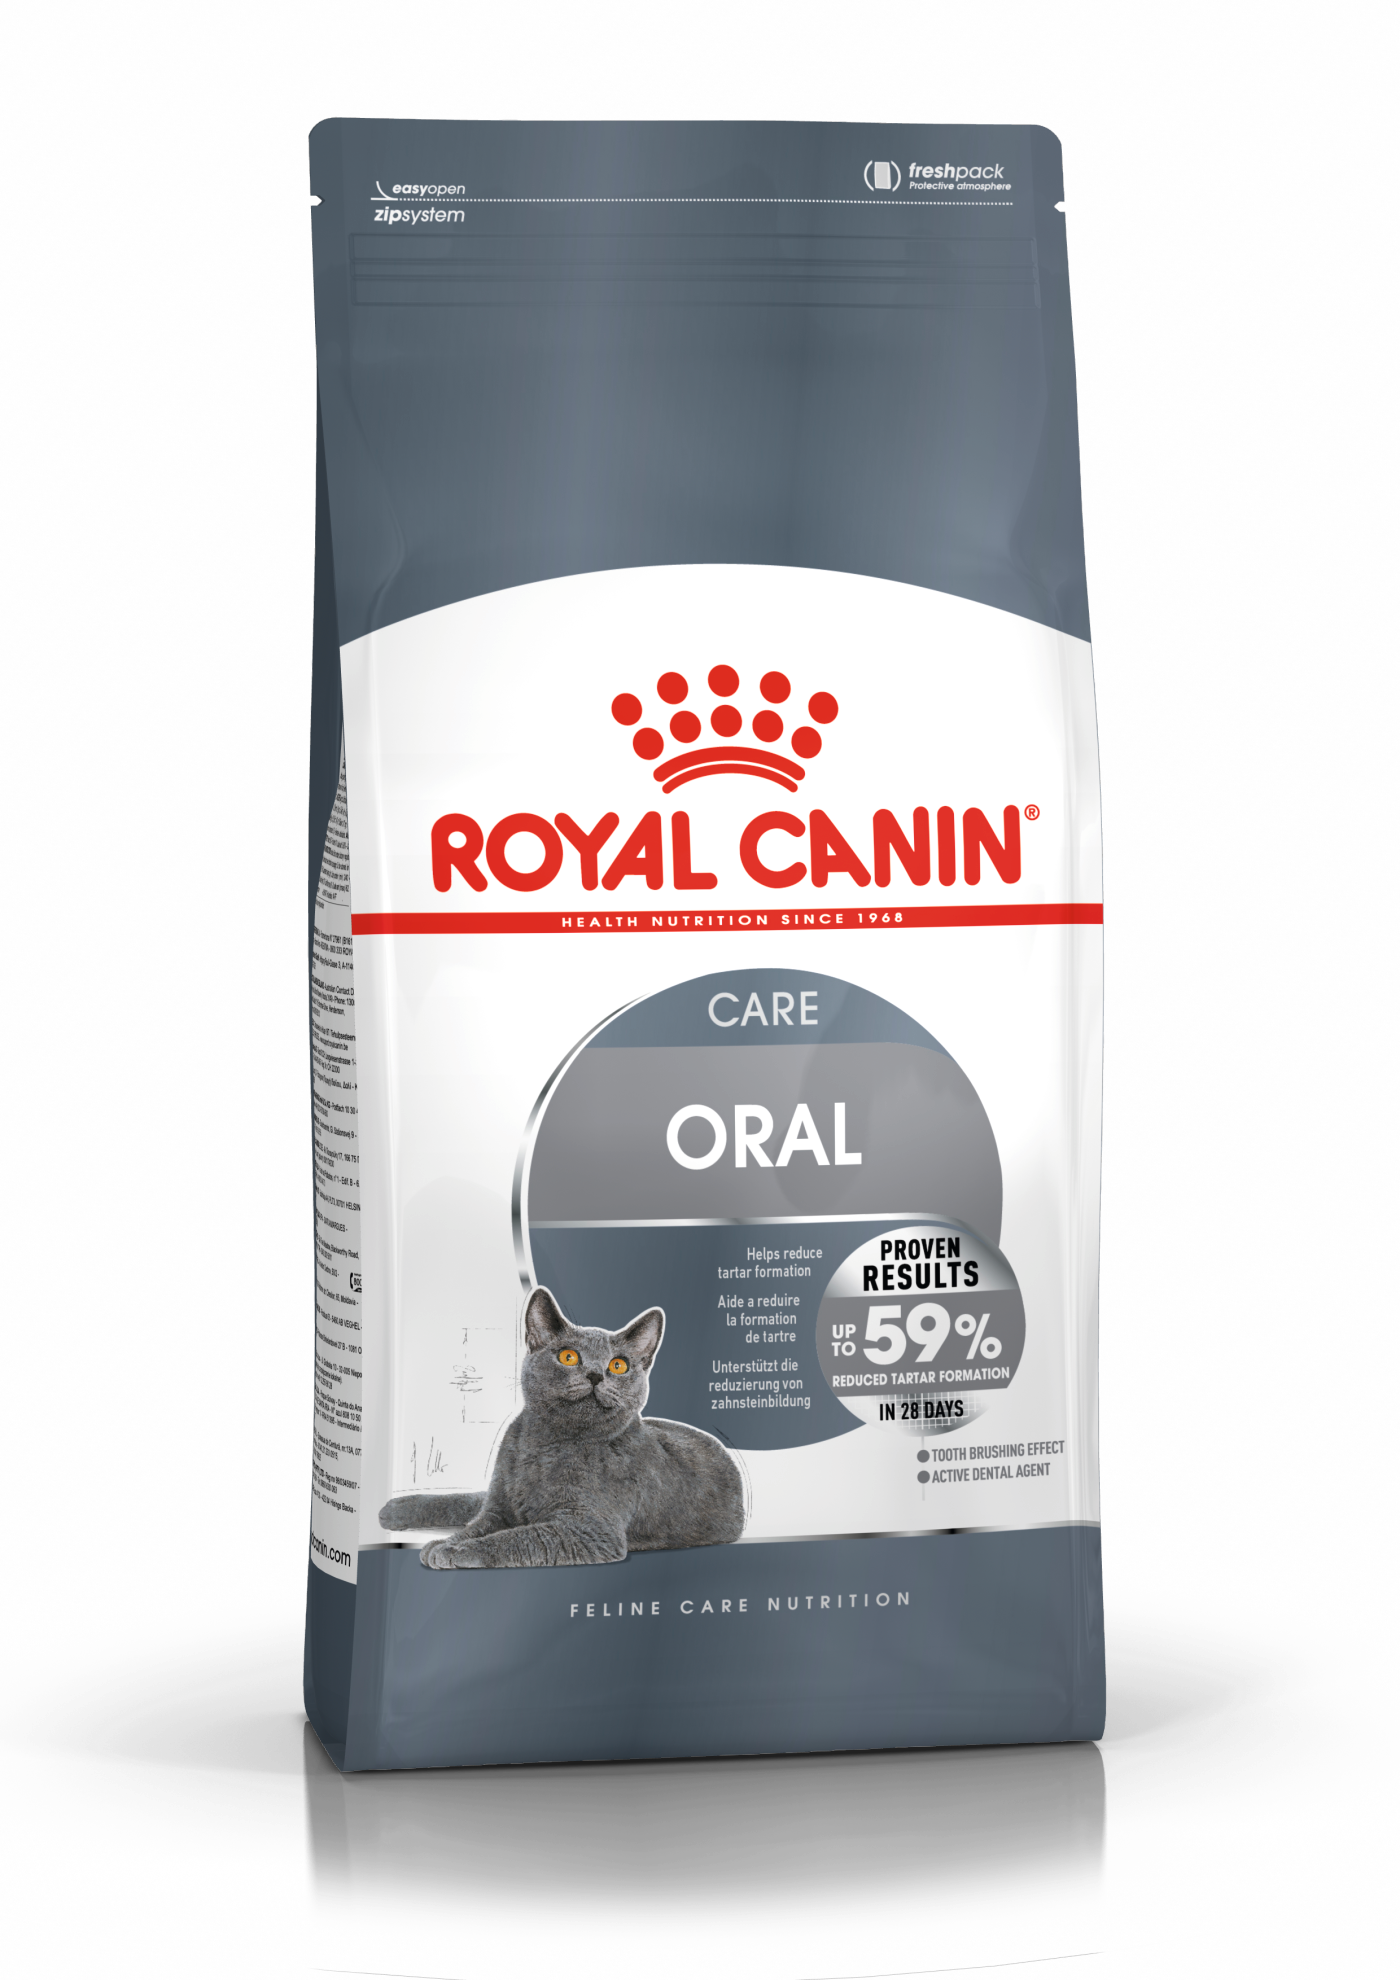 Care dry | Royal Canin